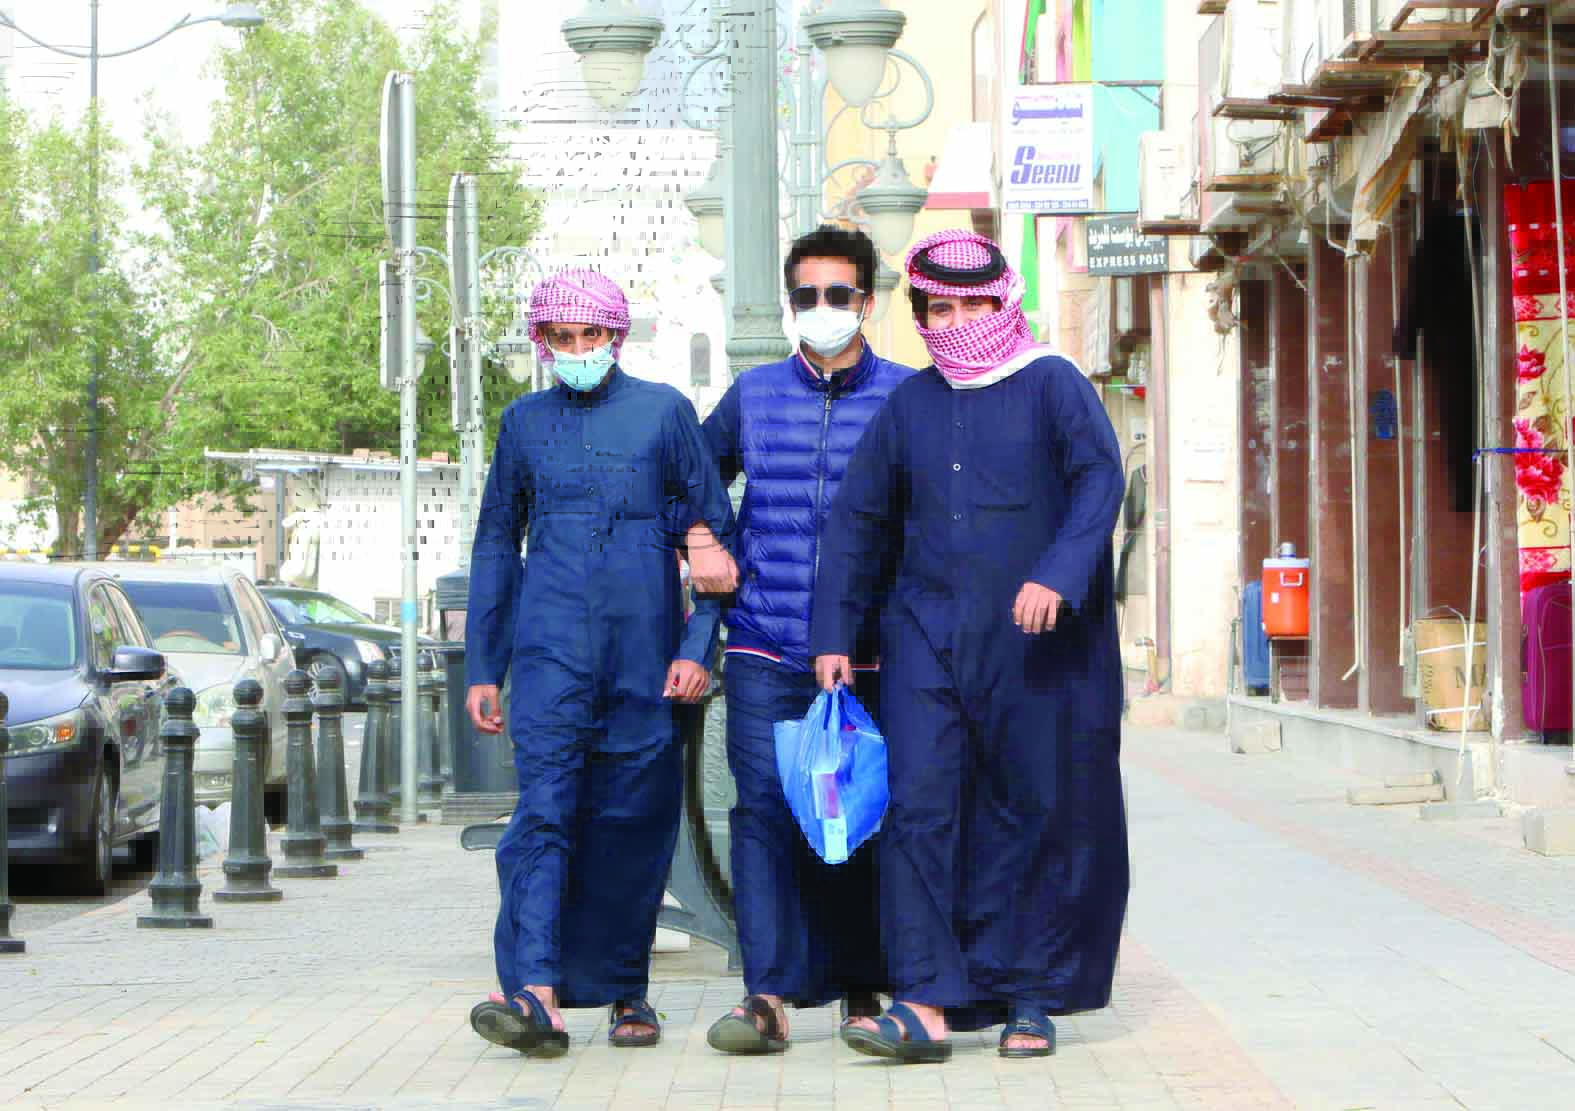 Kuwaitis wearing protective masks as they shops in Kuwait City on February 26, 2020.